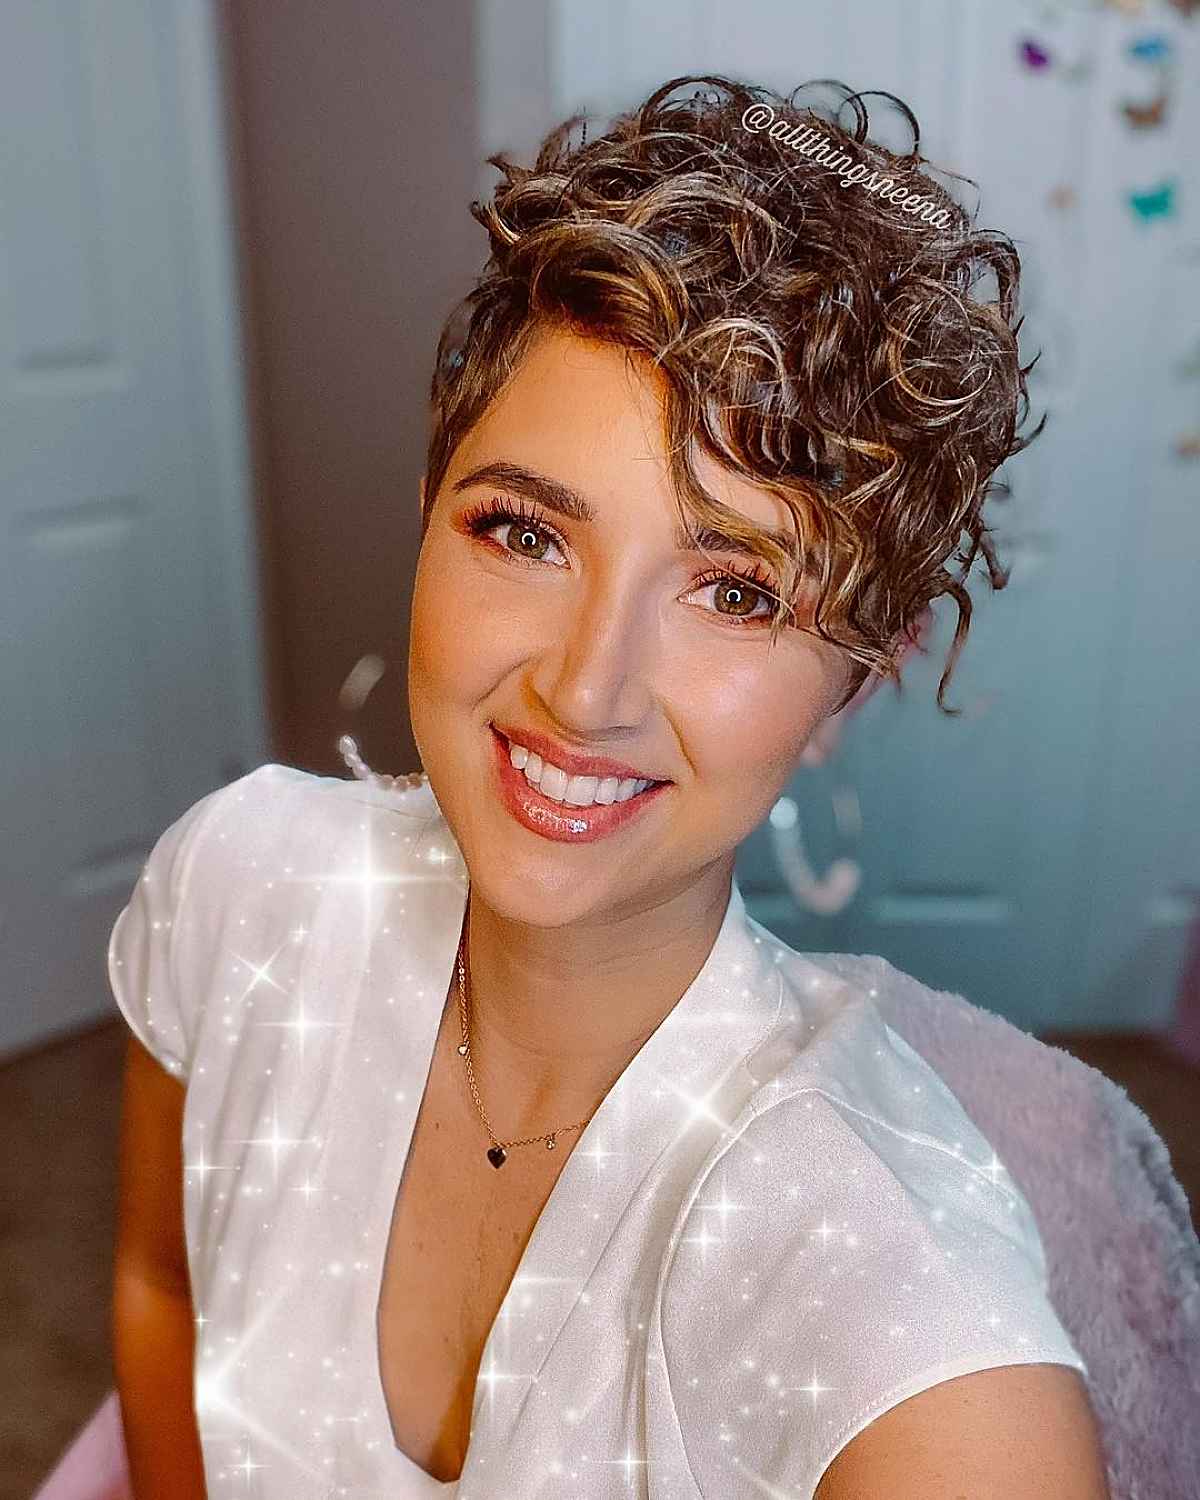 Pixie Cut for Messy, Curly Hair